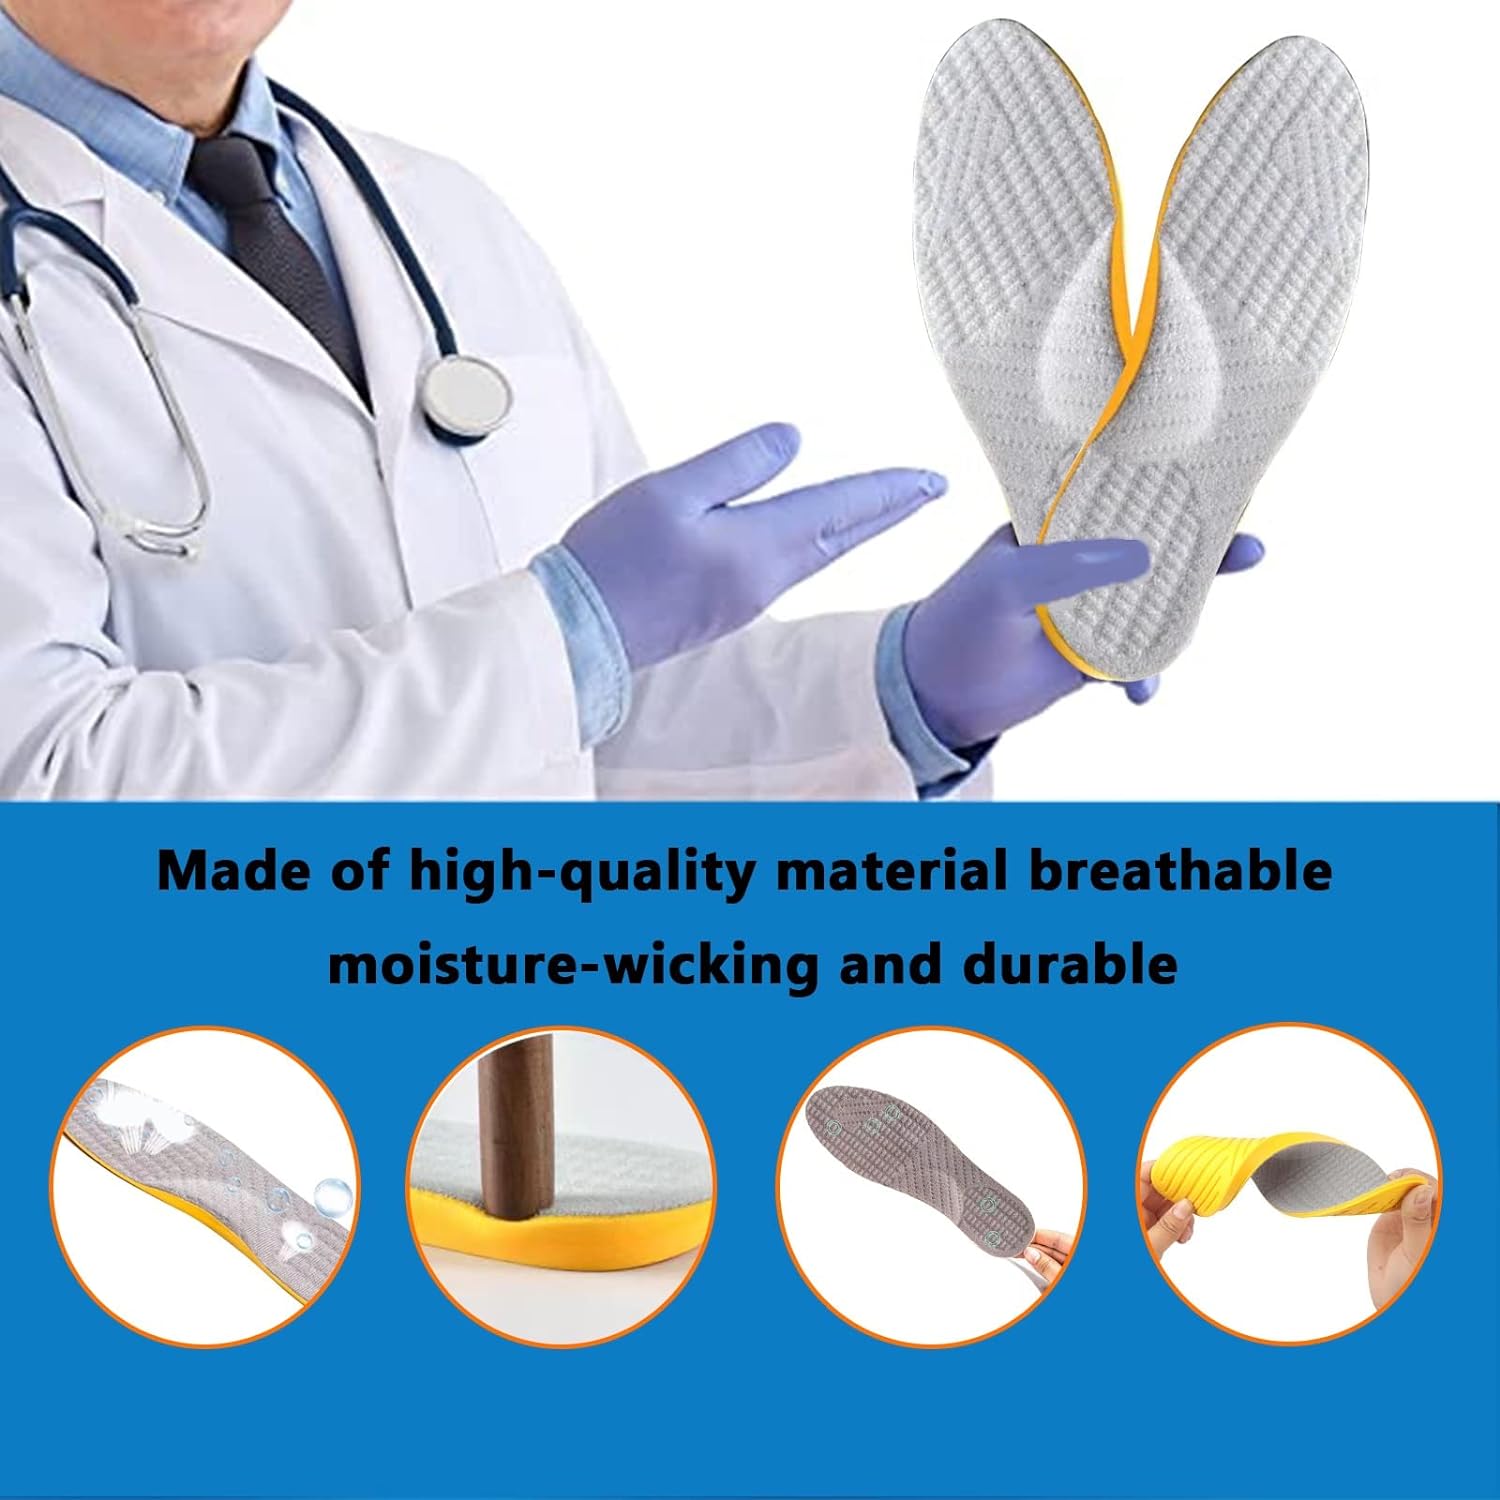 Supination Insoles for Over Supination Foot Alignment - Orthotic Inserts for Men and Women - Corrective Foot Supports for Supination Relief (Size : MEN8-8.5/WOMEN10-10.5)